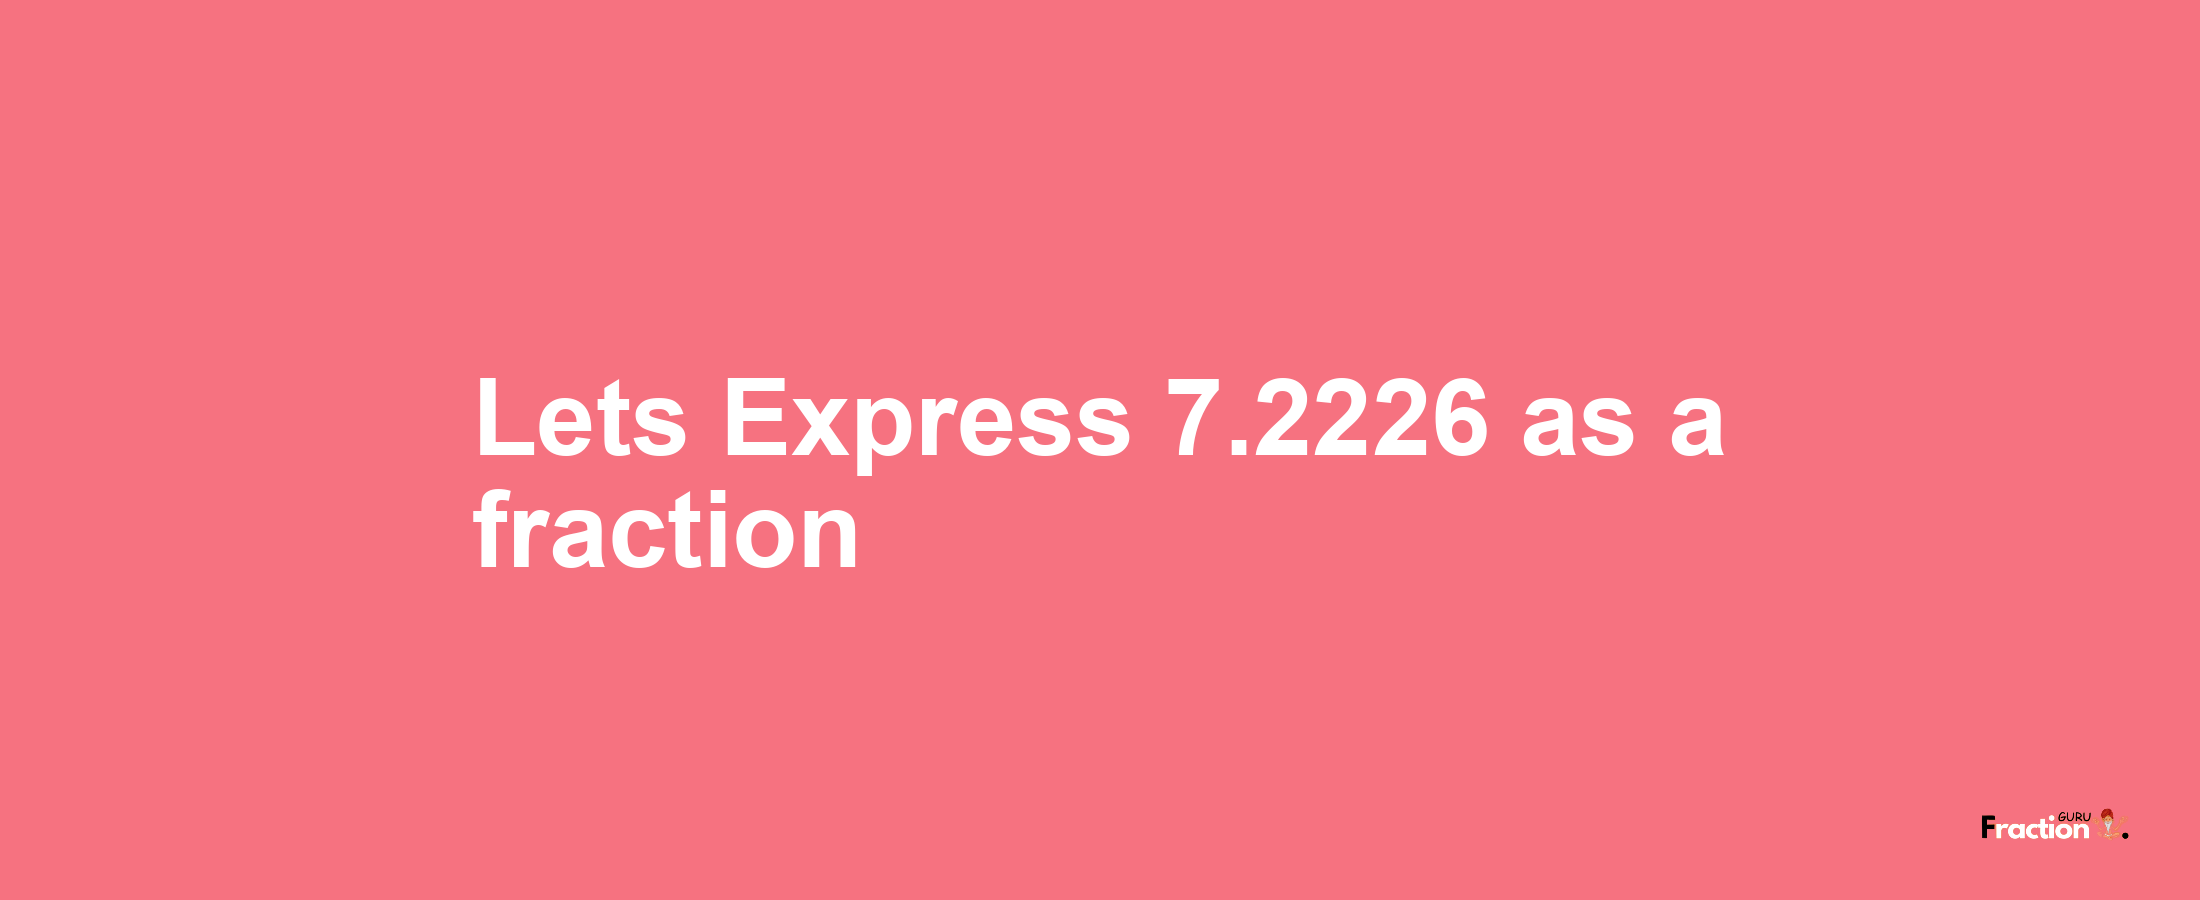 Lets Express 7.2226 as afraction